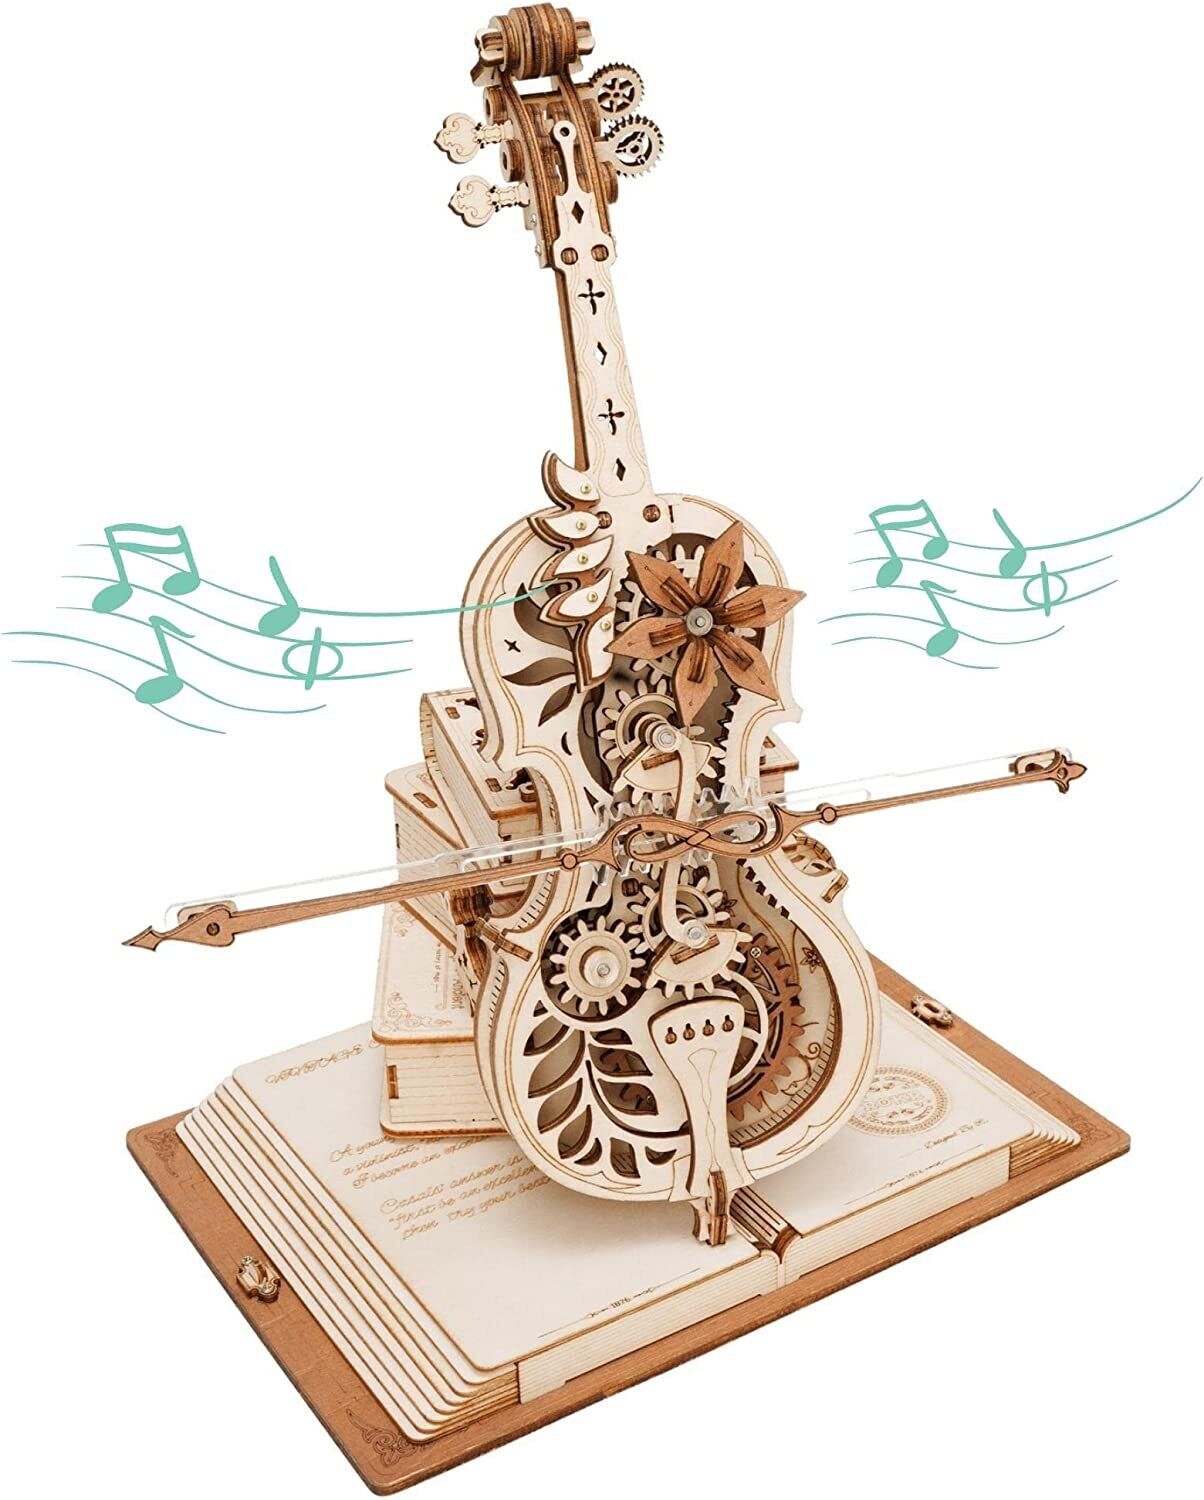 DIY Wooden Cello, Self Playing Musical Instrument, Magic Music Box, Cool Gift Ideas